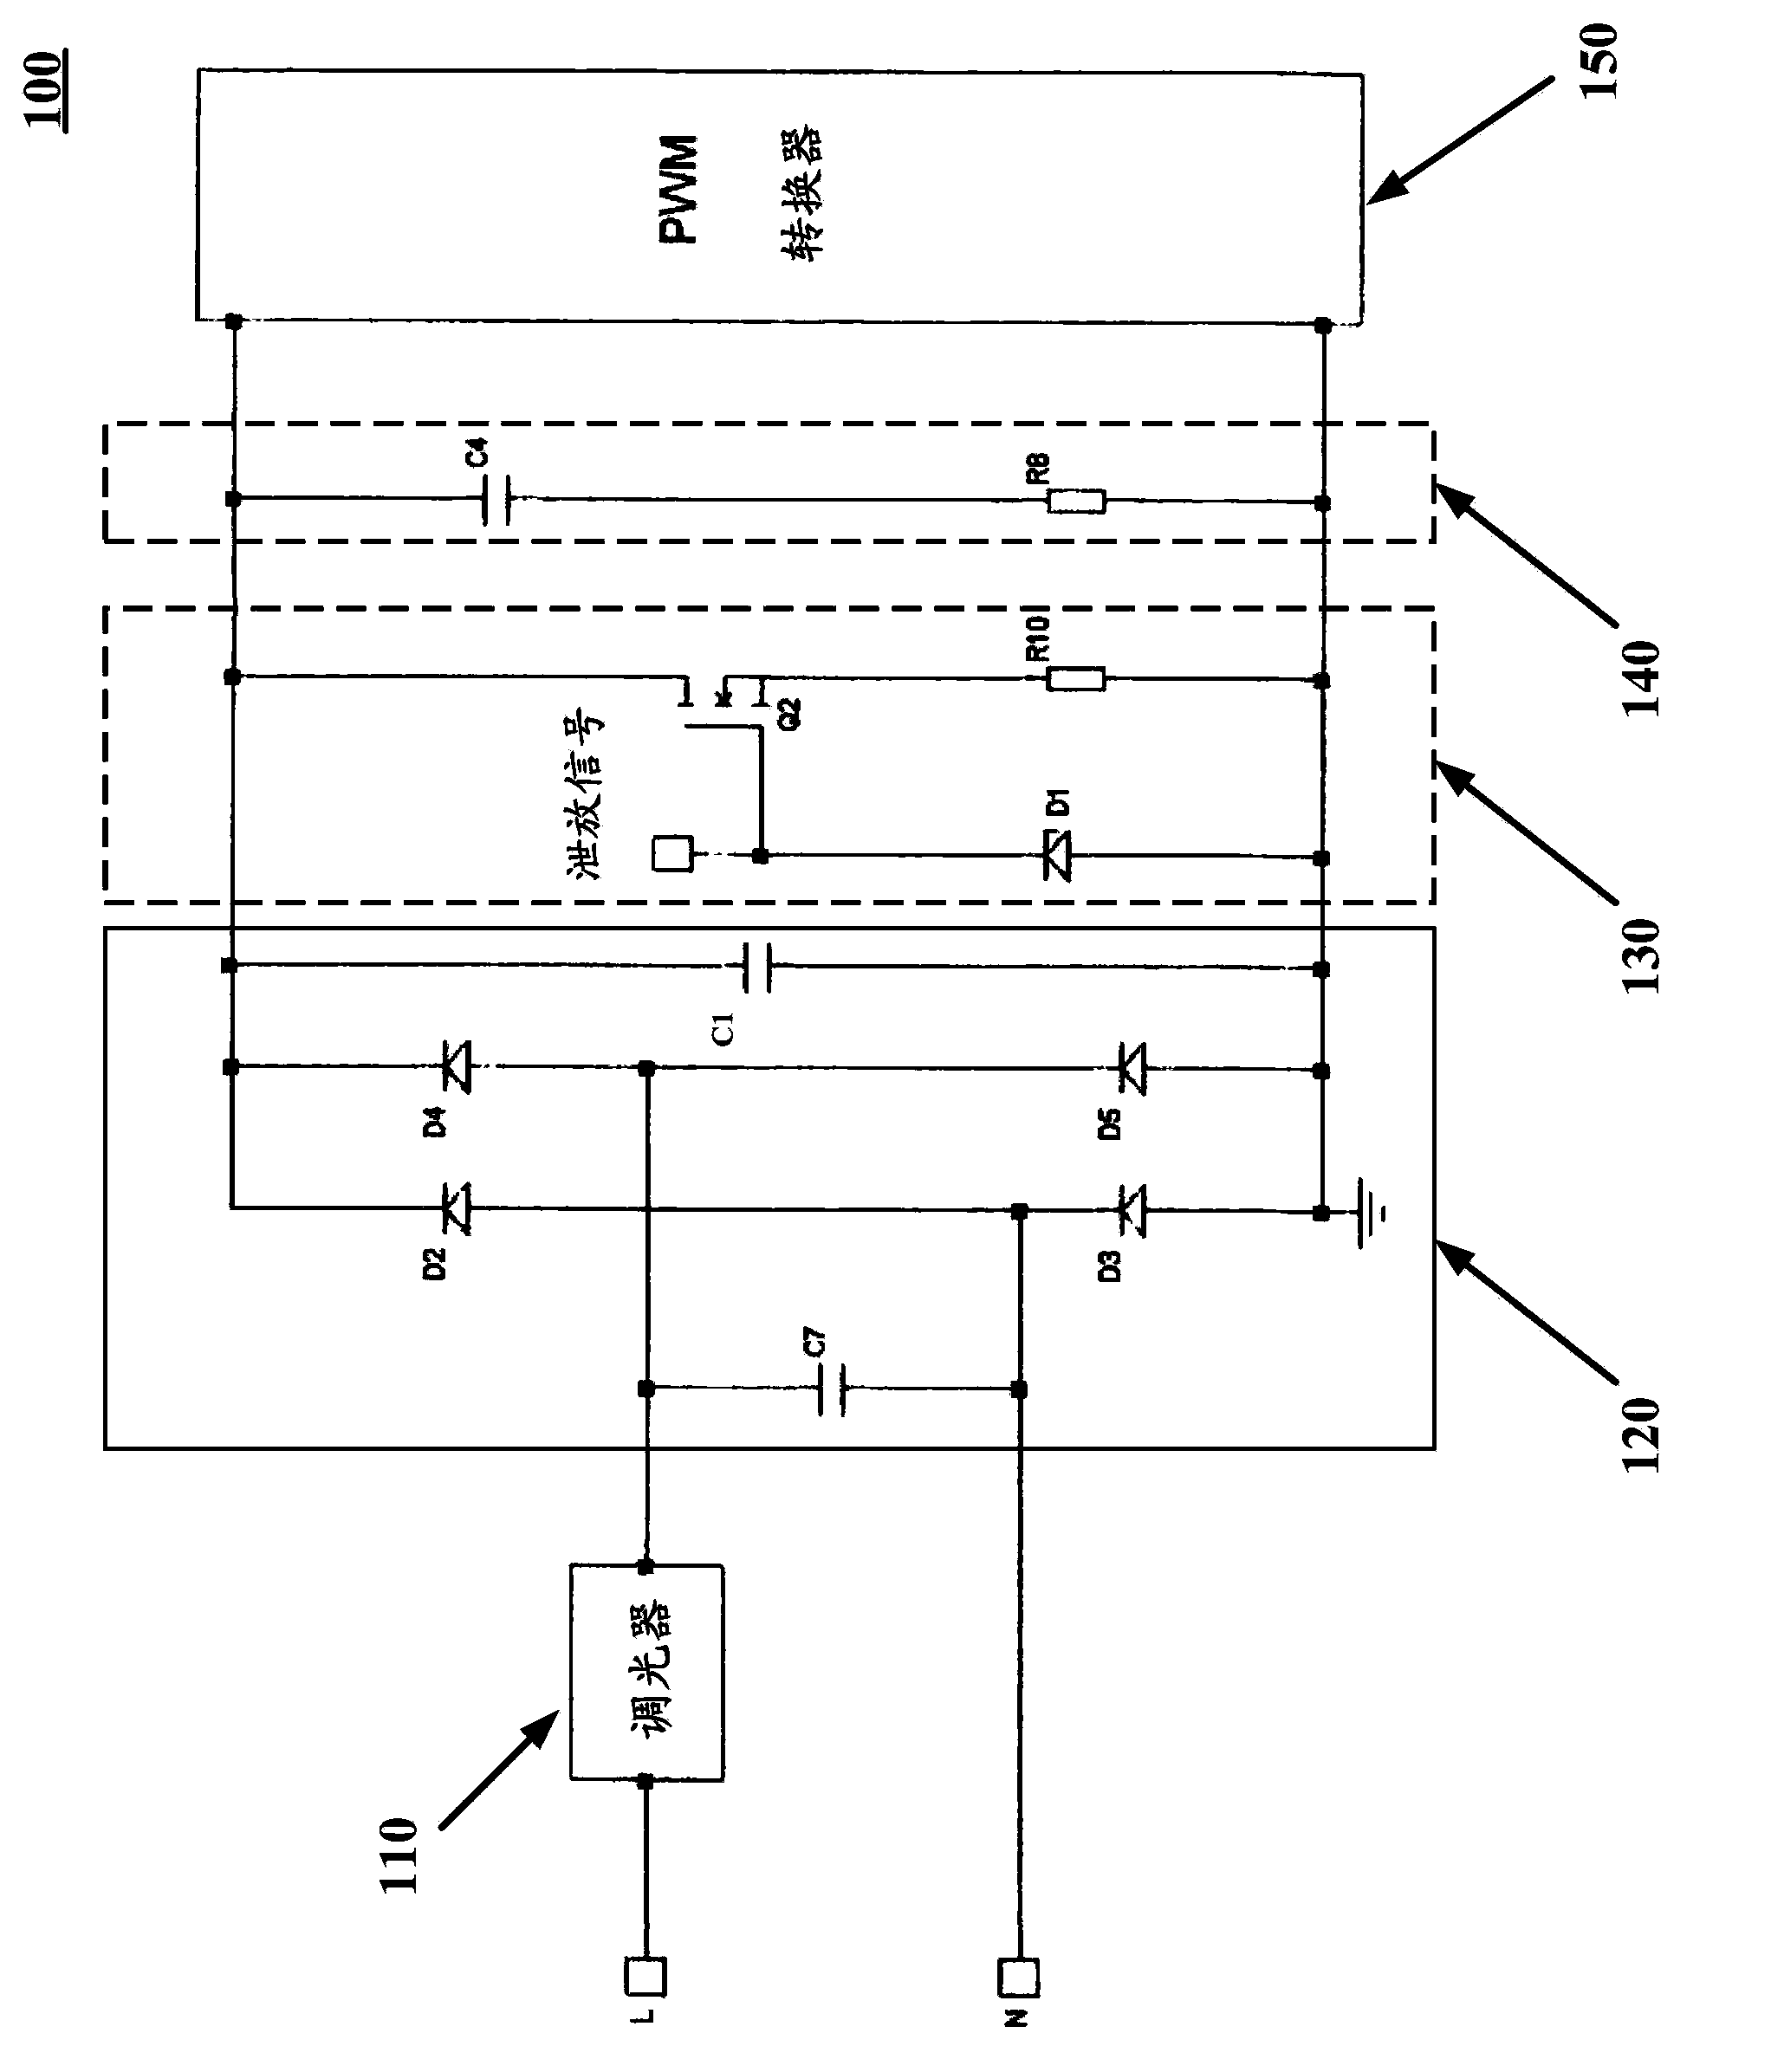 Phase-cut dimming control circuit and lighting control device